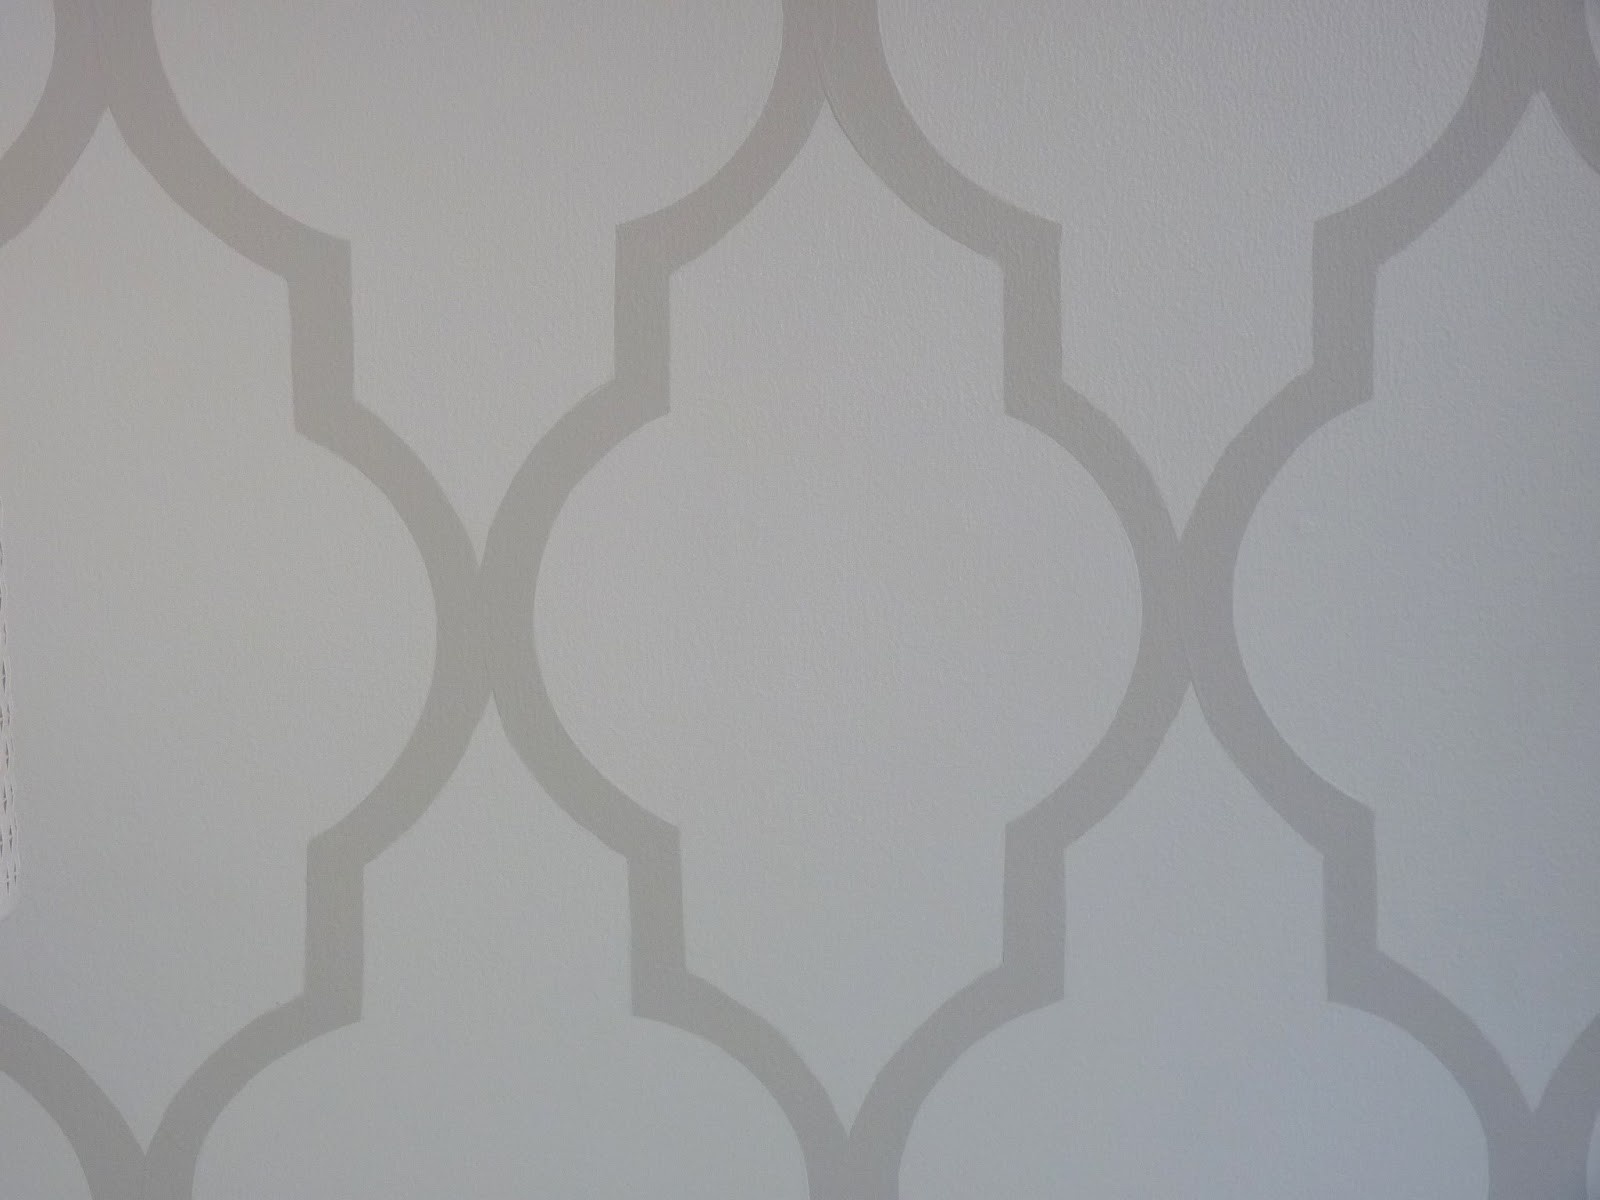 Lovely Free Printable Moroccan Wall Stencils | Www.pantry-Magic - Free Printable Moroccan Wall Stencils